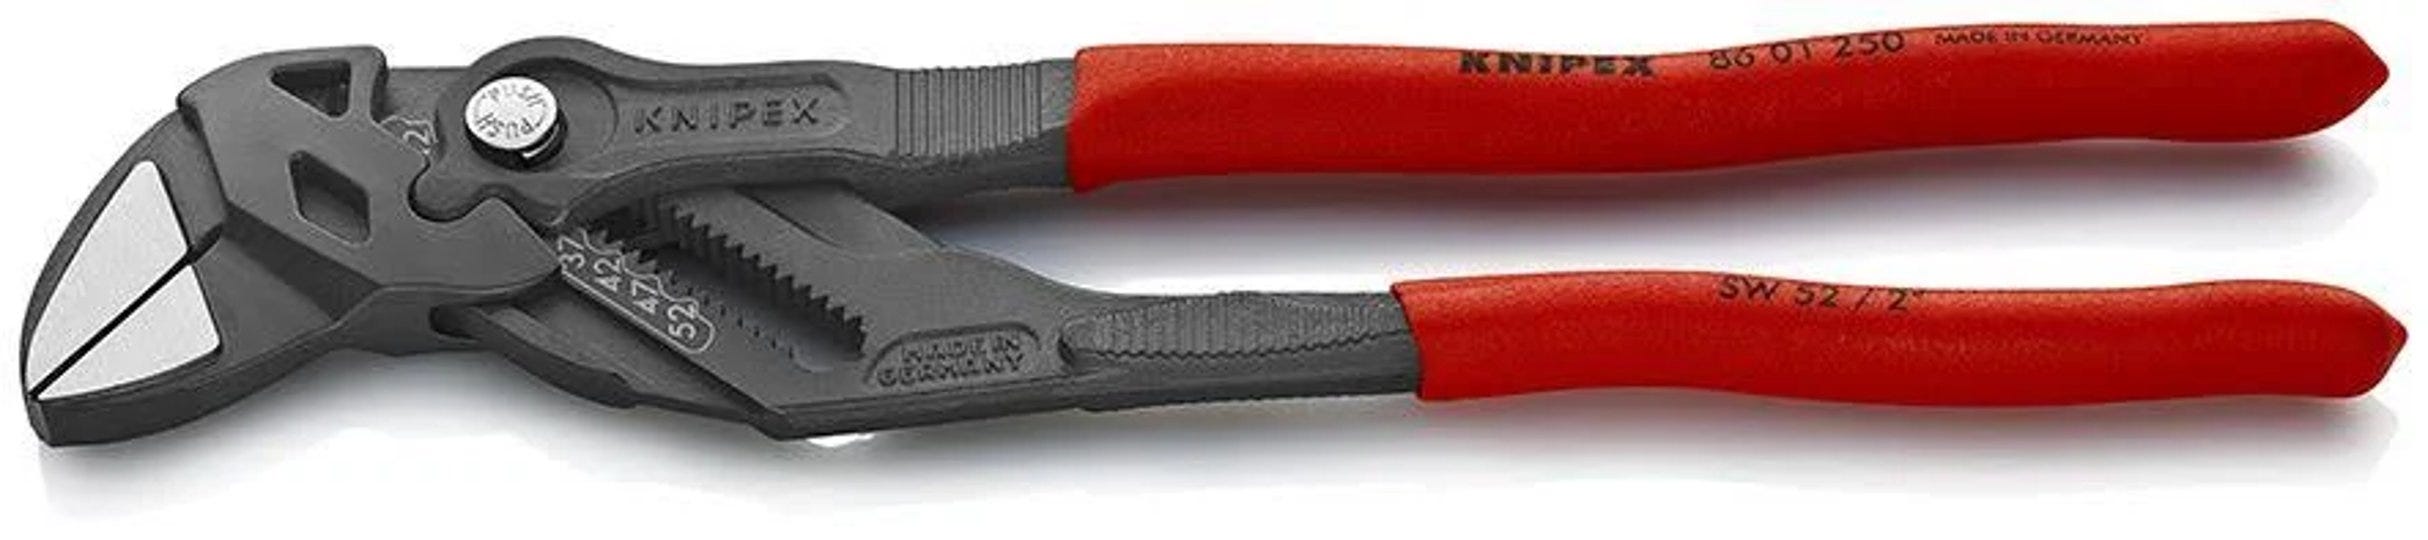 knipex-8601250-10-inch-pliers-wrench-1